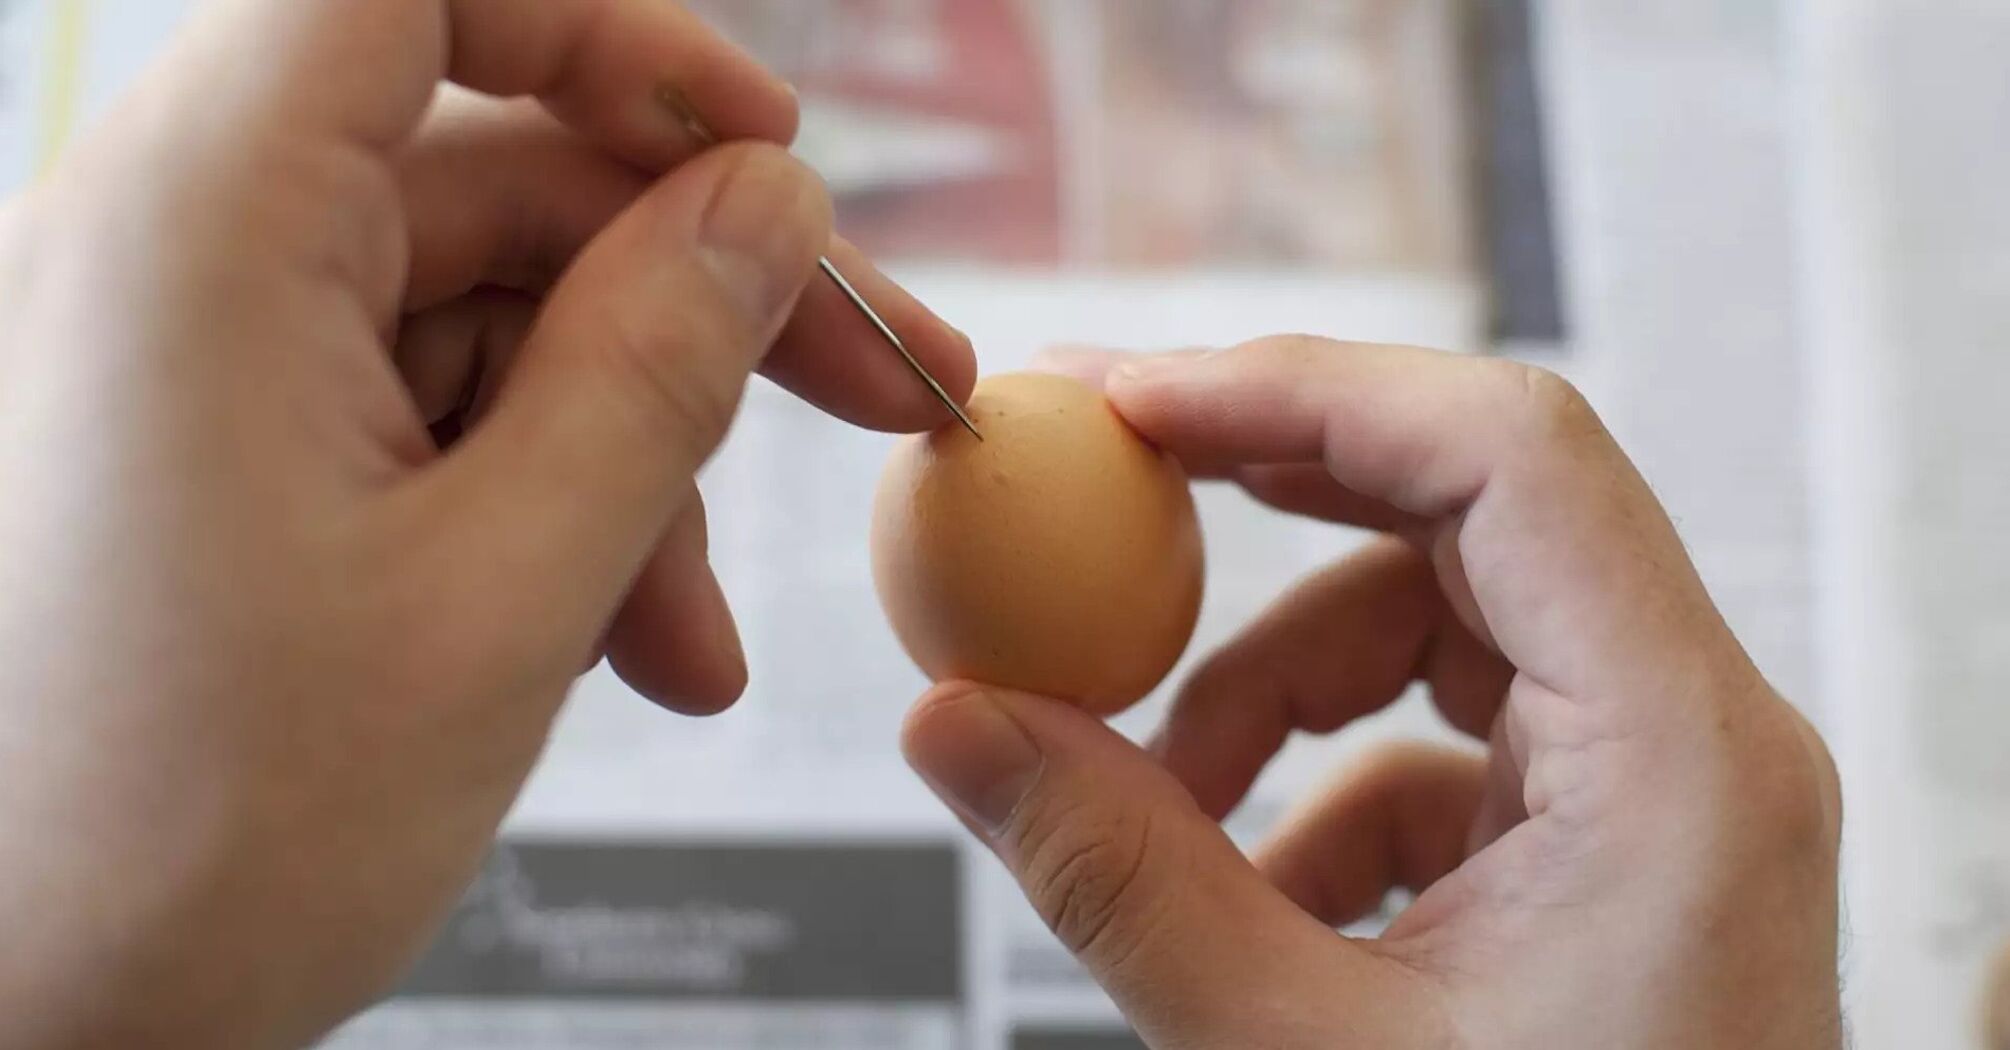 Why pierce an egg with a needle before boiling